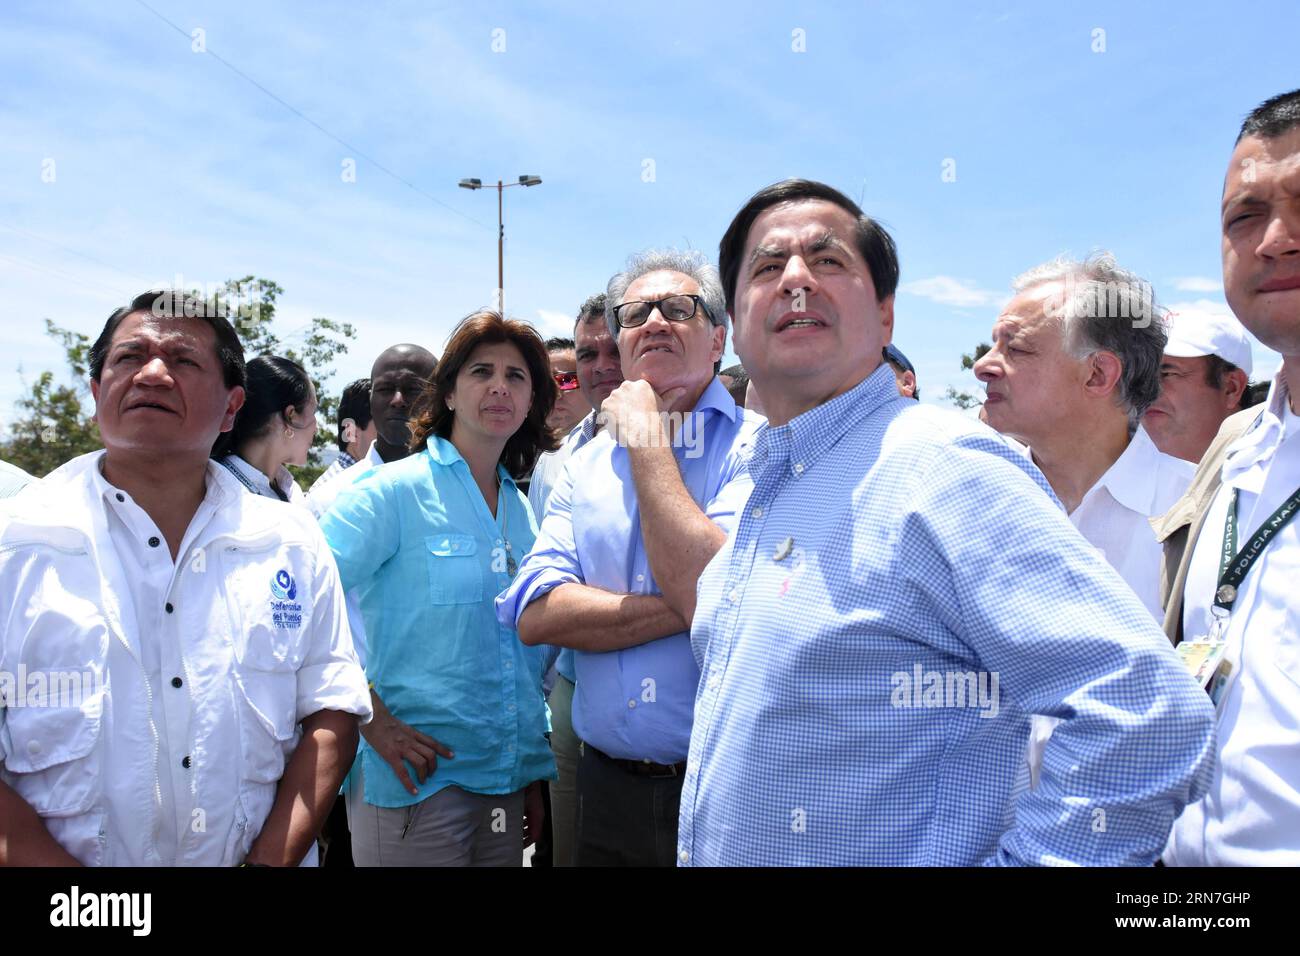 (150906) -- CUCUTA,  - Image provided by the Organization of American States (OAS) shows OAS Secretary General Luis Almagro (C), accompanied by Colombian Foreign Minister Maria Angela Holguin (2nd L), visitng a shelter in Cucuta, Colombia, on Sept. 5, 2015. Luis Almagro on Saturday visited shelters in Cucuta for Colombians allegedly deported from Venezuela. OAS) (dzl) COLOMBIA-VENEZUELA-OAS CHIEF-VISIT COLOMBIA SxCHANCELLERY PUBLICATIONxNOTxINxCHN   150906 Cucuta Image provided by The Organization of American States Oas Shows Oas Secretary General Luis Almagro C accompanied by Colombian Foreig Stock Photo